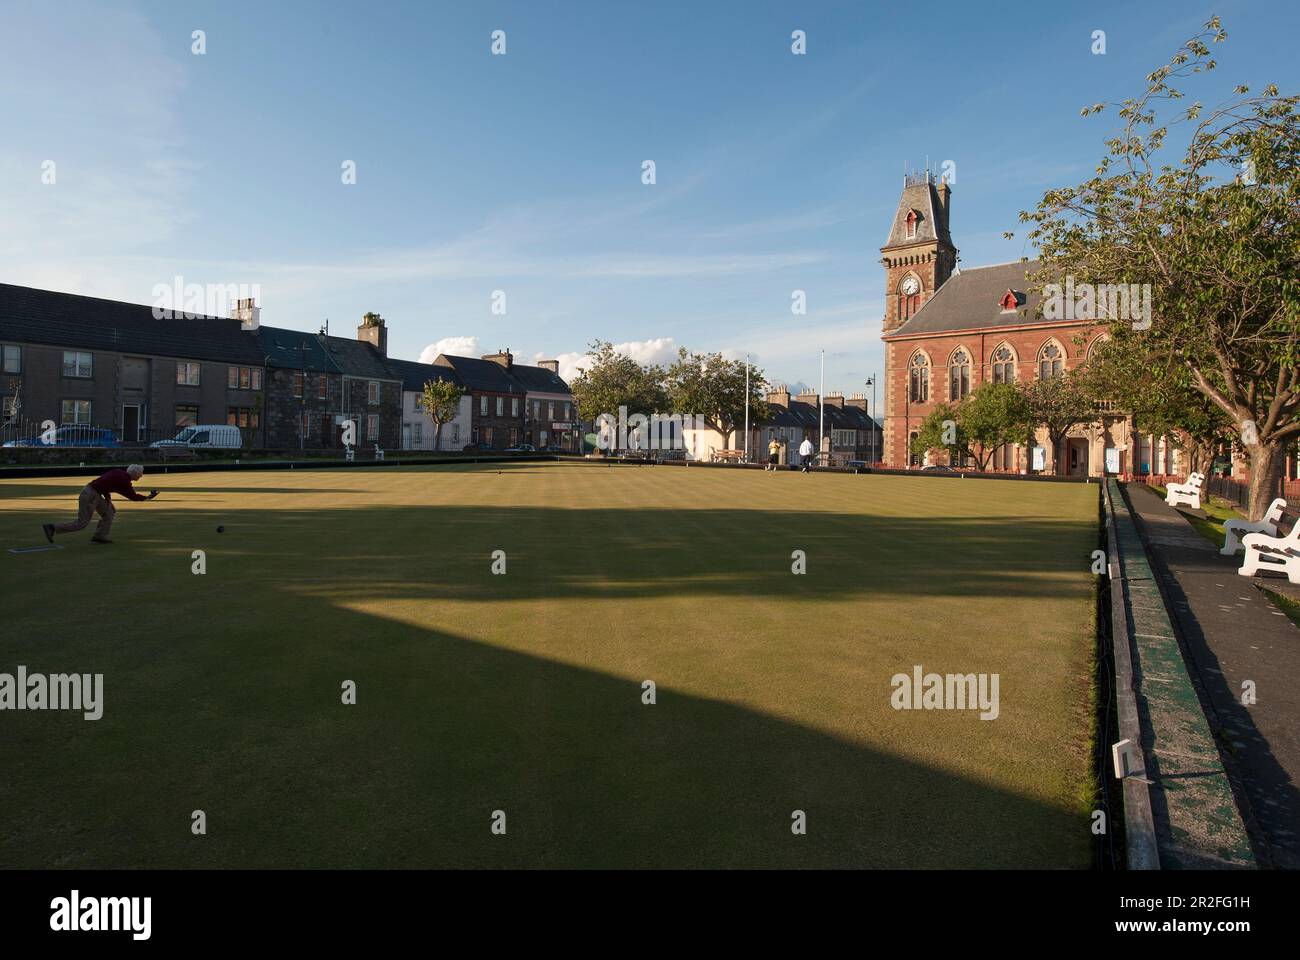 Bowls in play in front of the Wigtown County Buildings and Town Hall at the Wigtown lawn bowling club green in Wigtown; Dumfries; and Galloway, Scotla Stock Photo